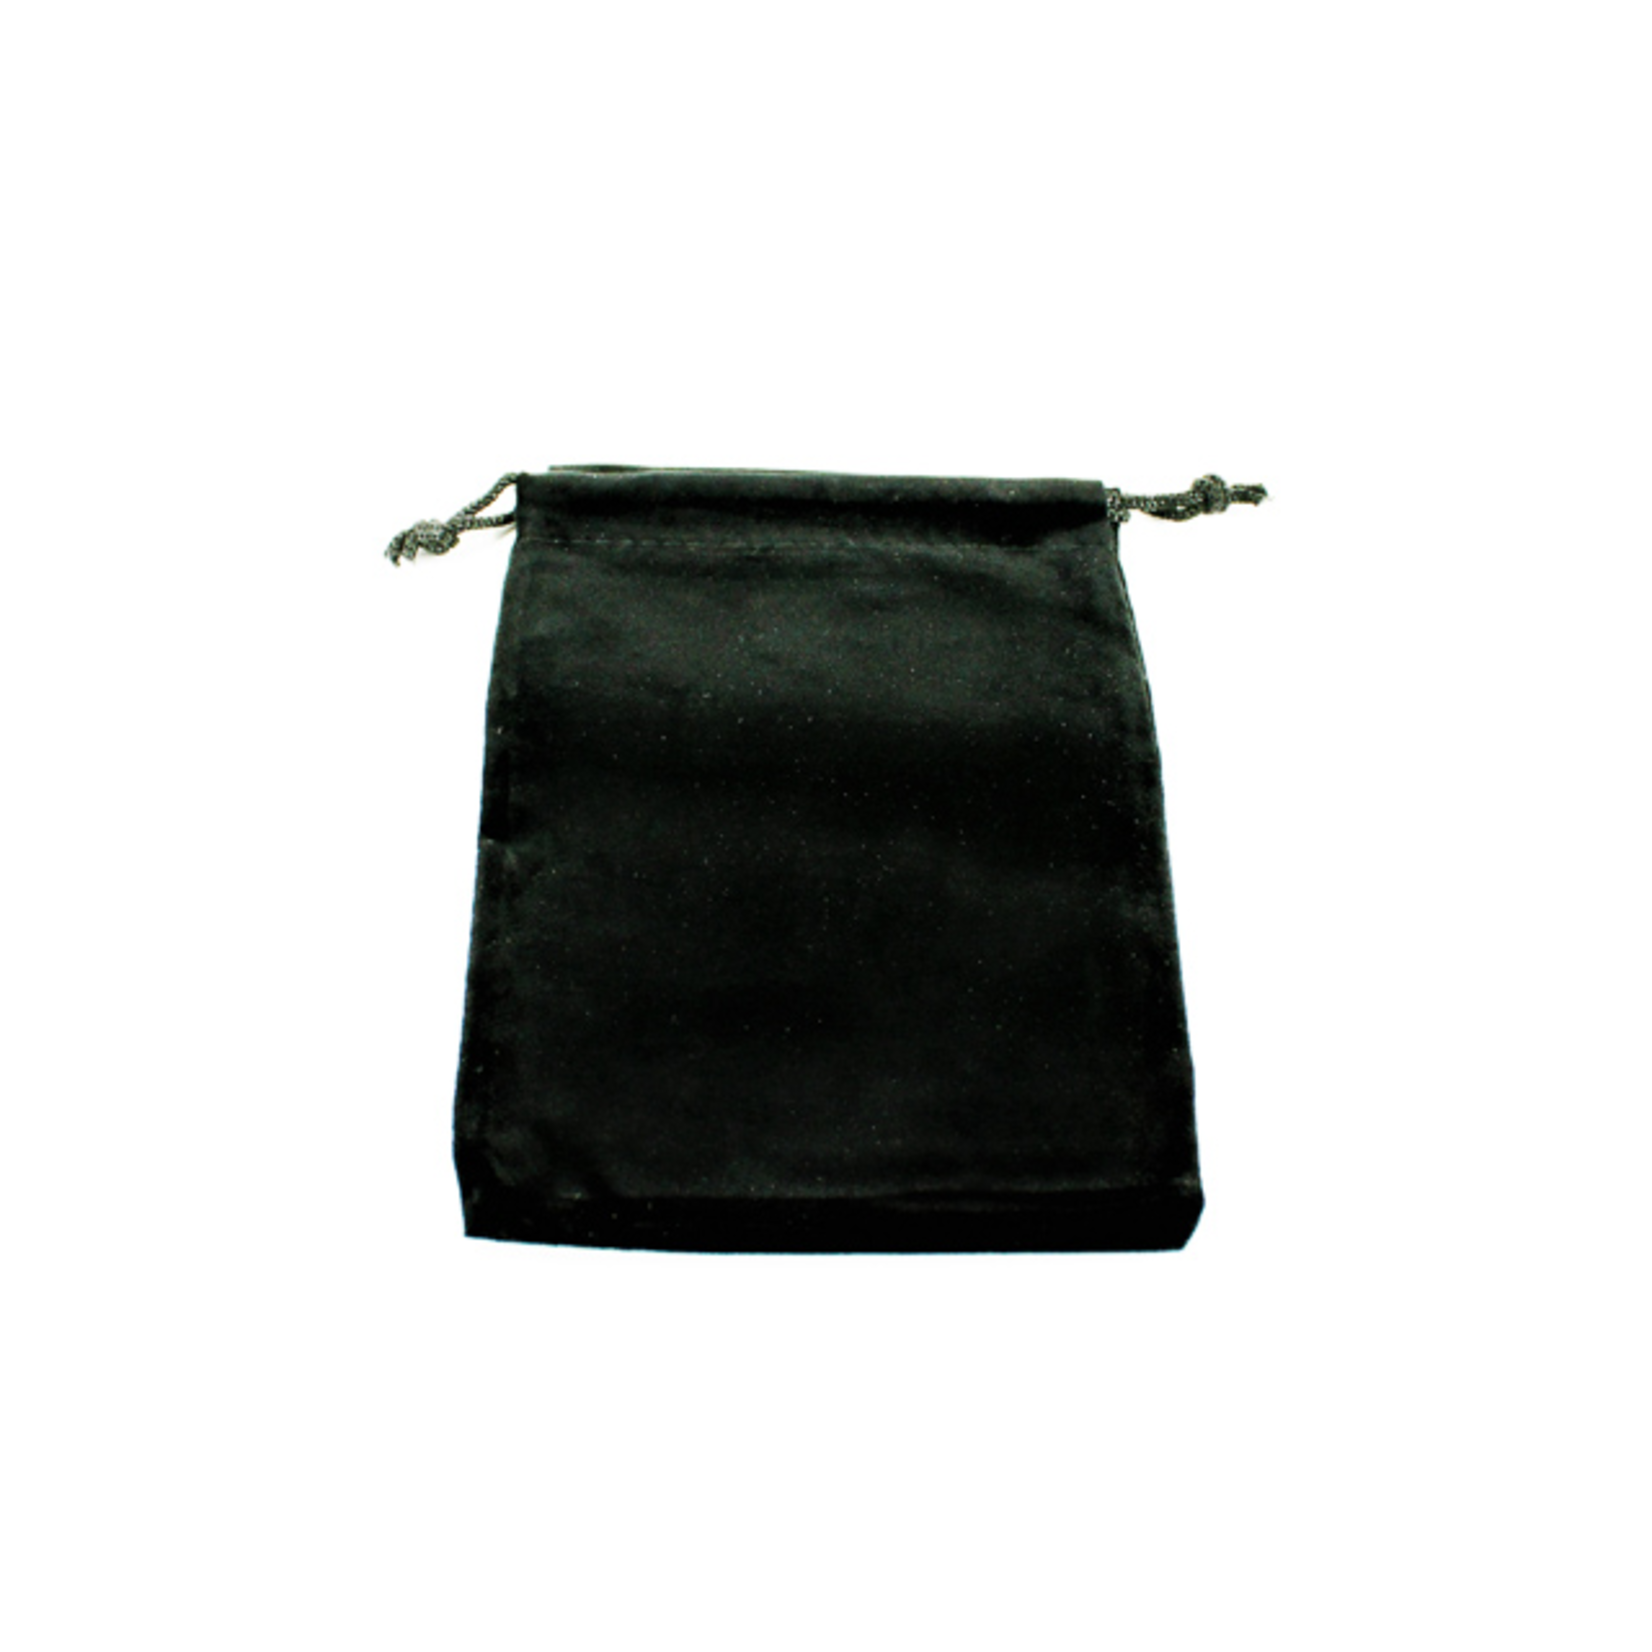 Chessex Dice Bag: Suede Black (Small)